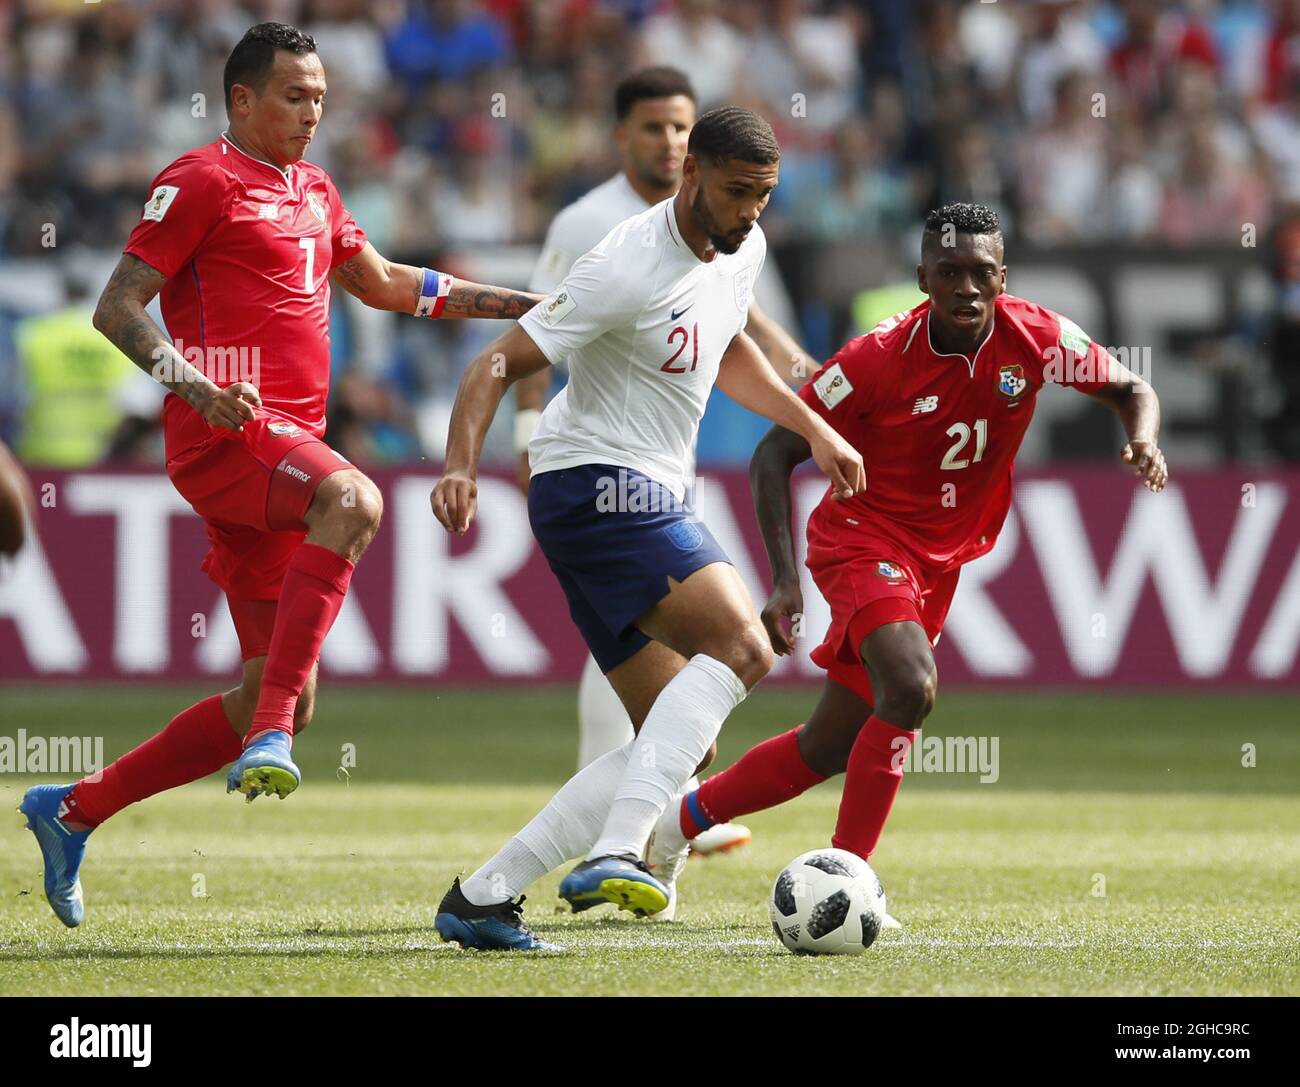 Ruben Loftus-Cheek of England  tackled by Blas Perez of Panama during the FIFA World Cup 2018 Group G match at the Nizhny Novgorod Stadium, Nizhny Novgorod. Picture date 24th June 2018. Picture credit should read: David Klein/Sportimage via PA Images Stock Photo